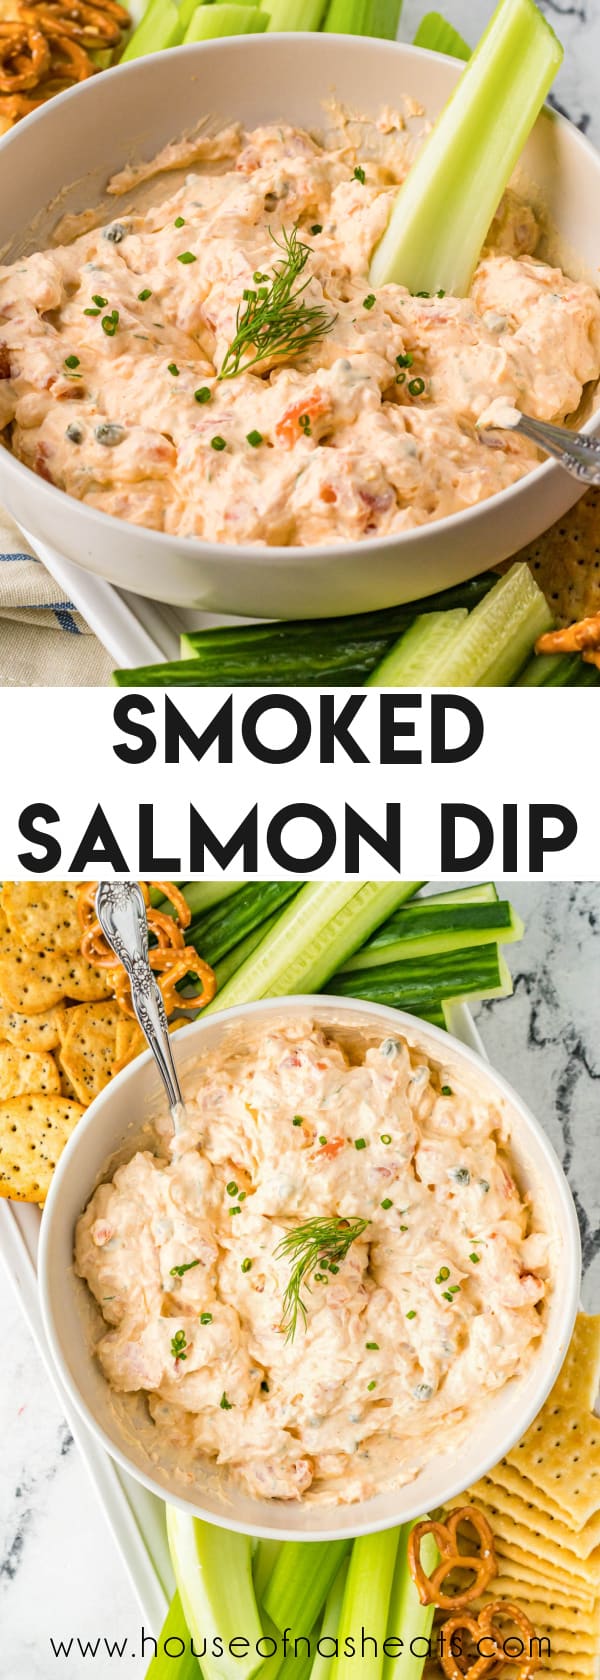 A collage of images of smoked salmon sip with text overlay.